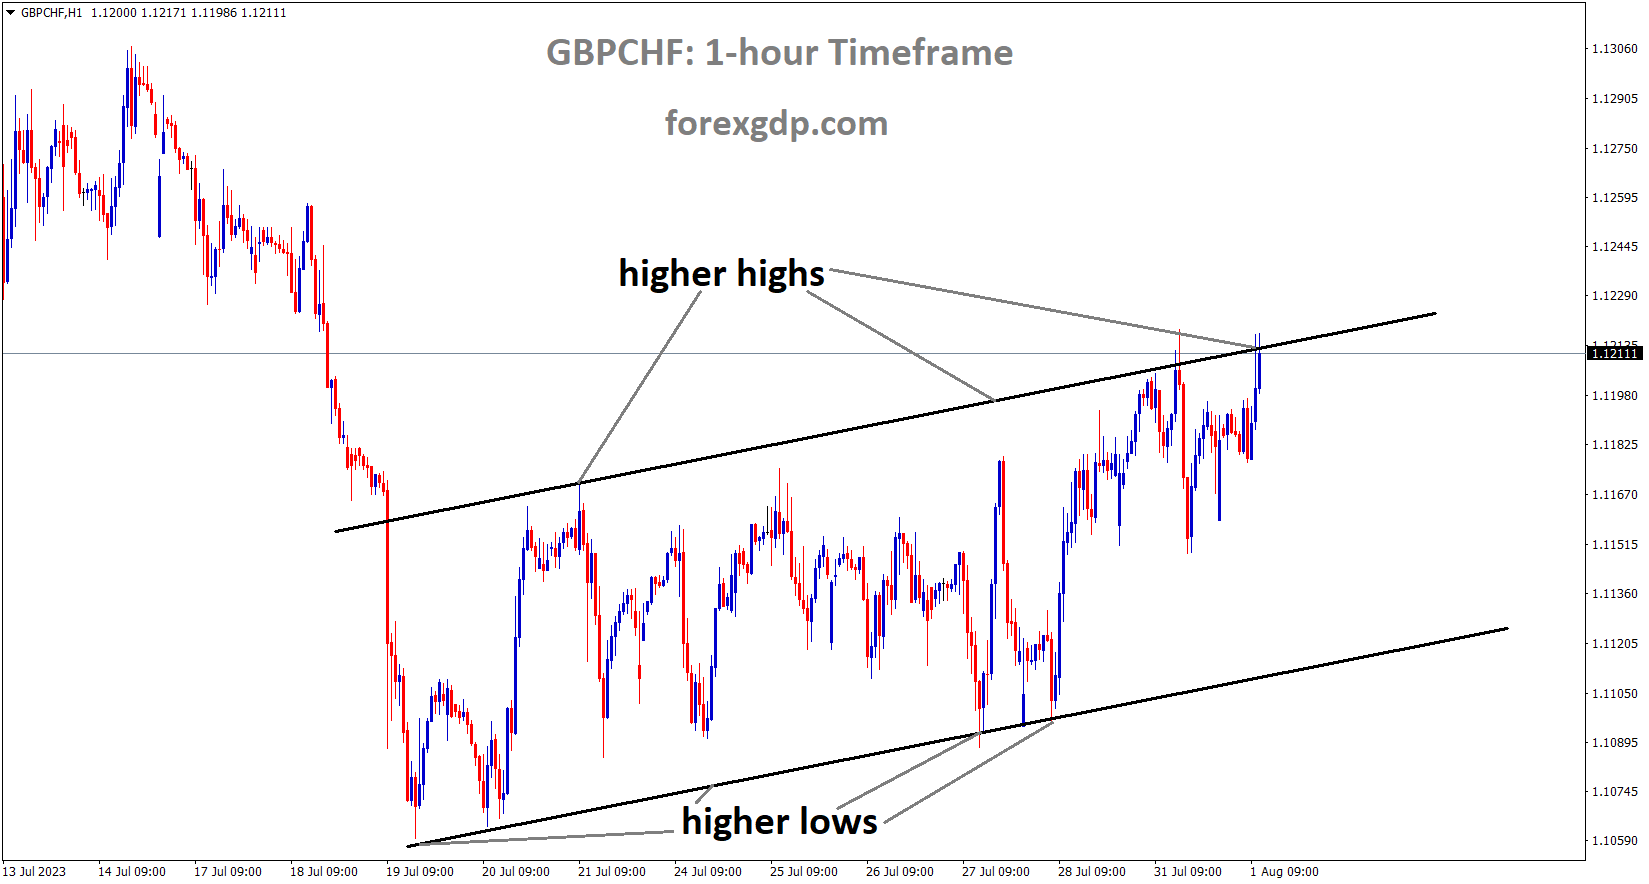 GBPCHF is moving in an Ascending channel and the market has reached the higher high area of the channel